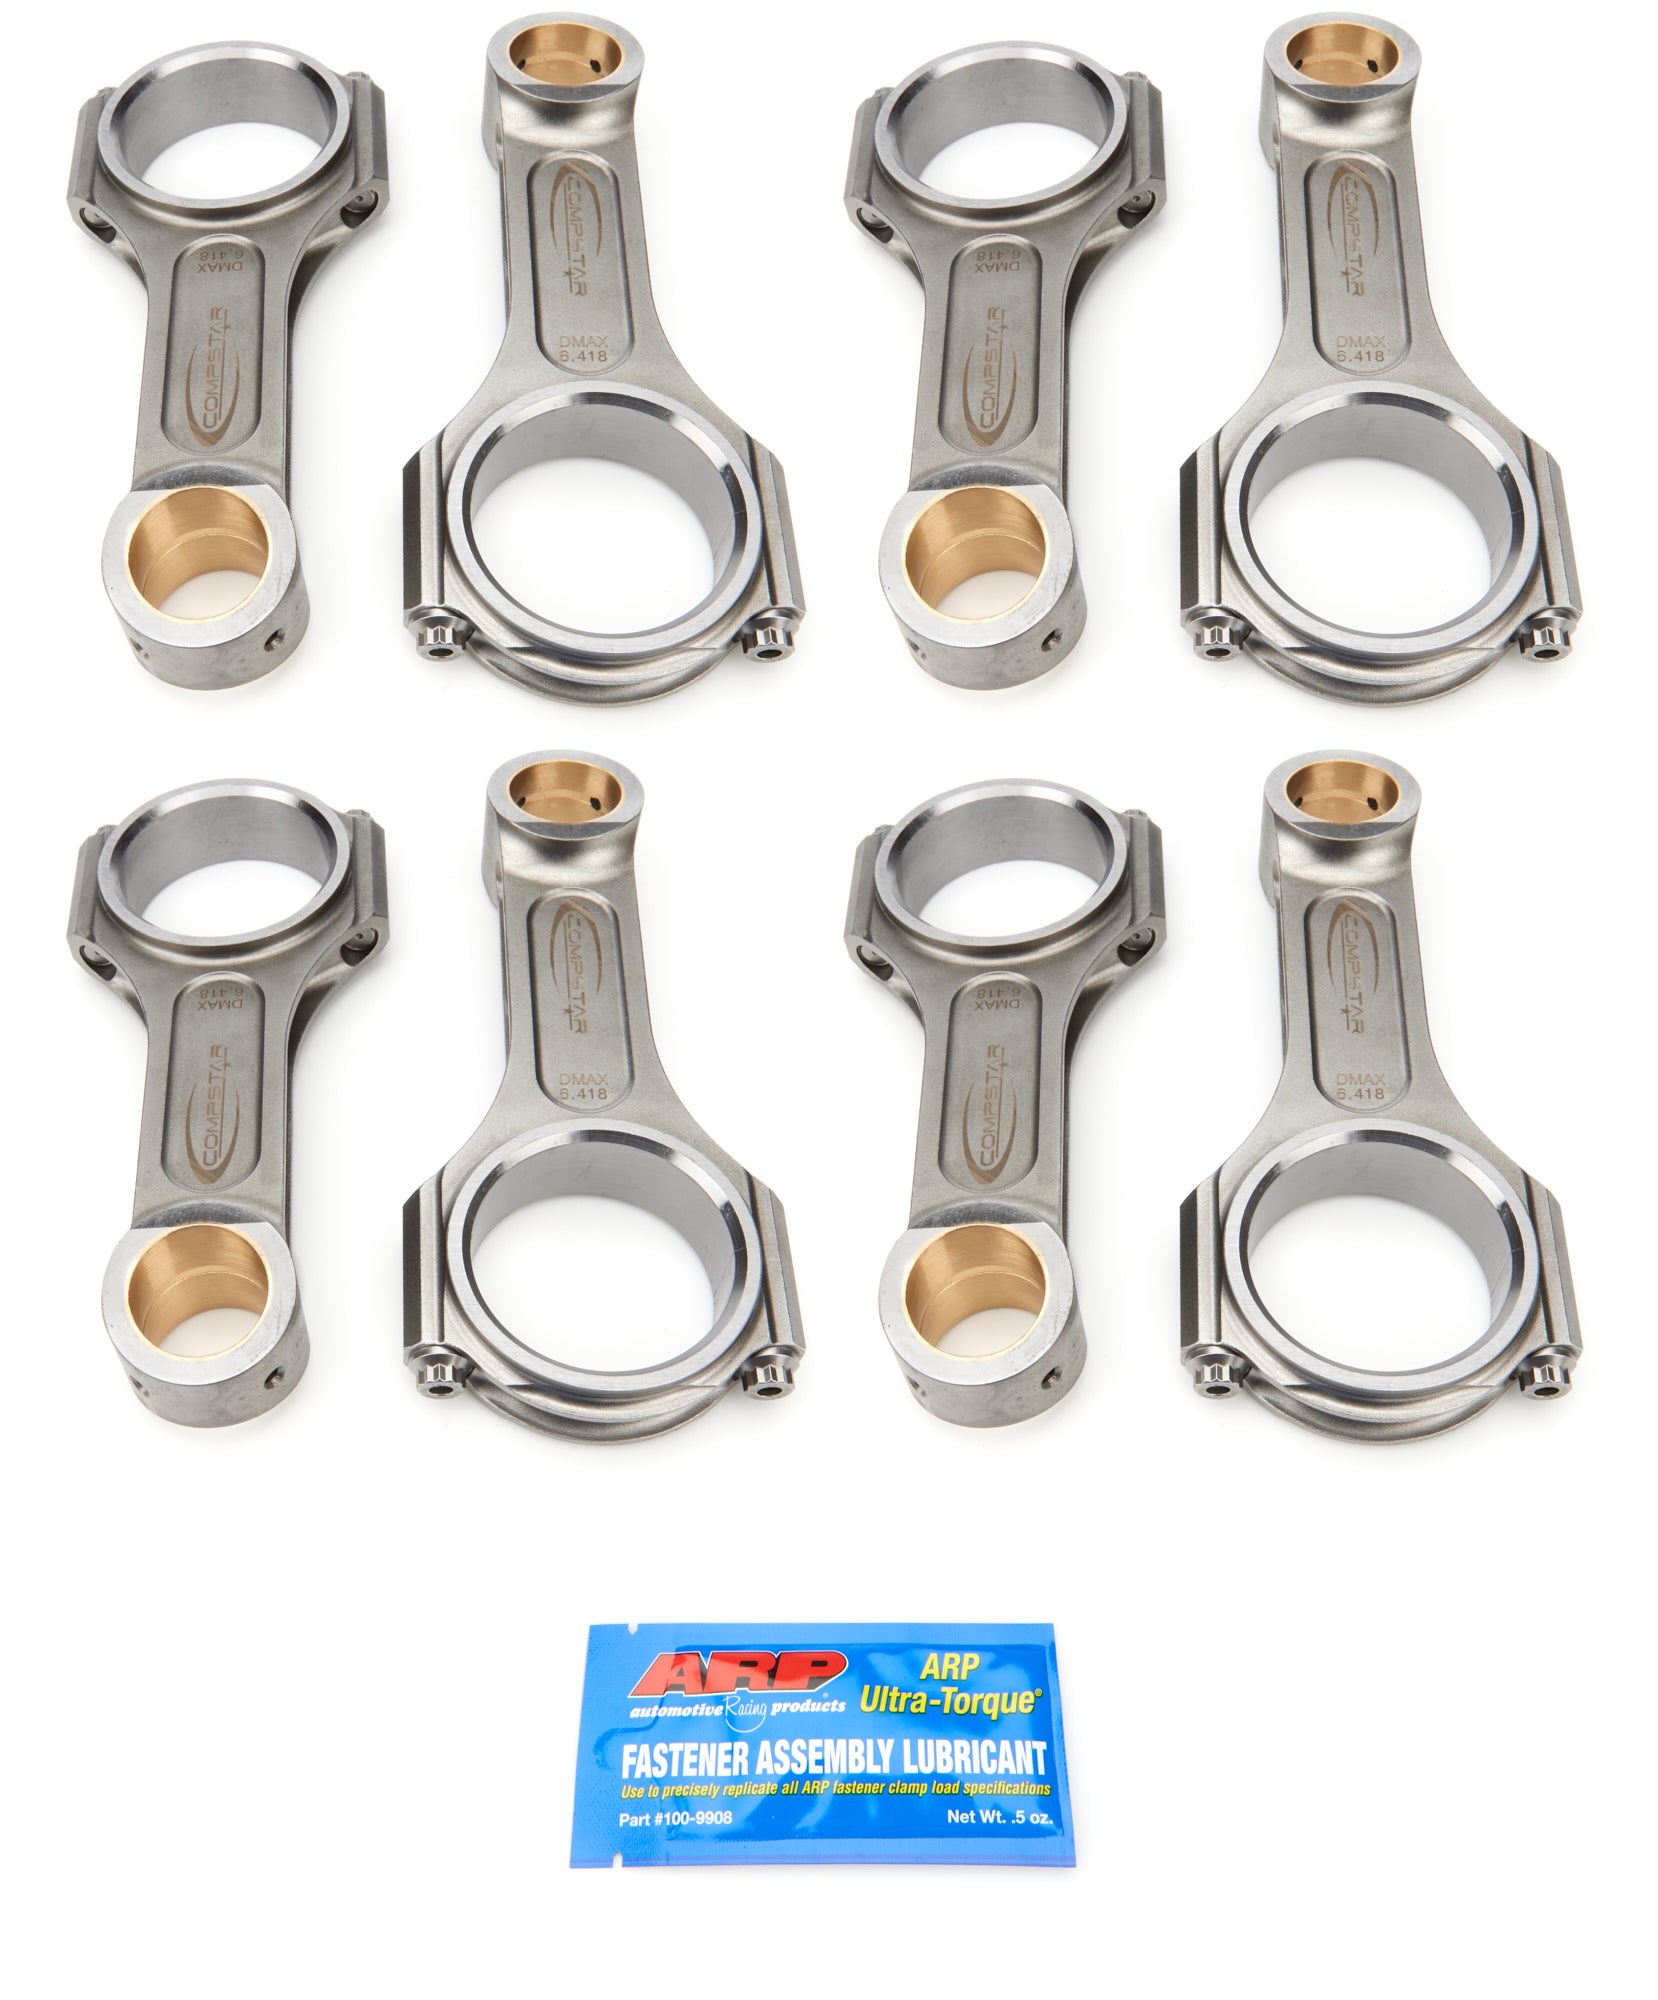 Callies 6.418 Duramax H-Beam Rod Set Compstar Xtreme Connecting Rods and Components Connecting Rods main image